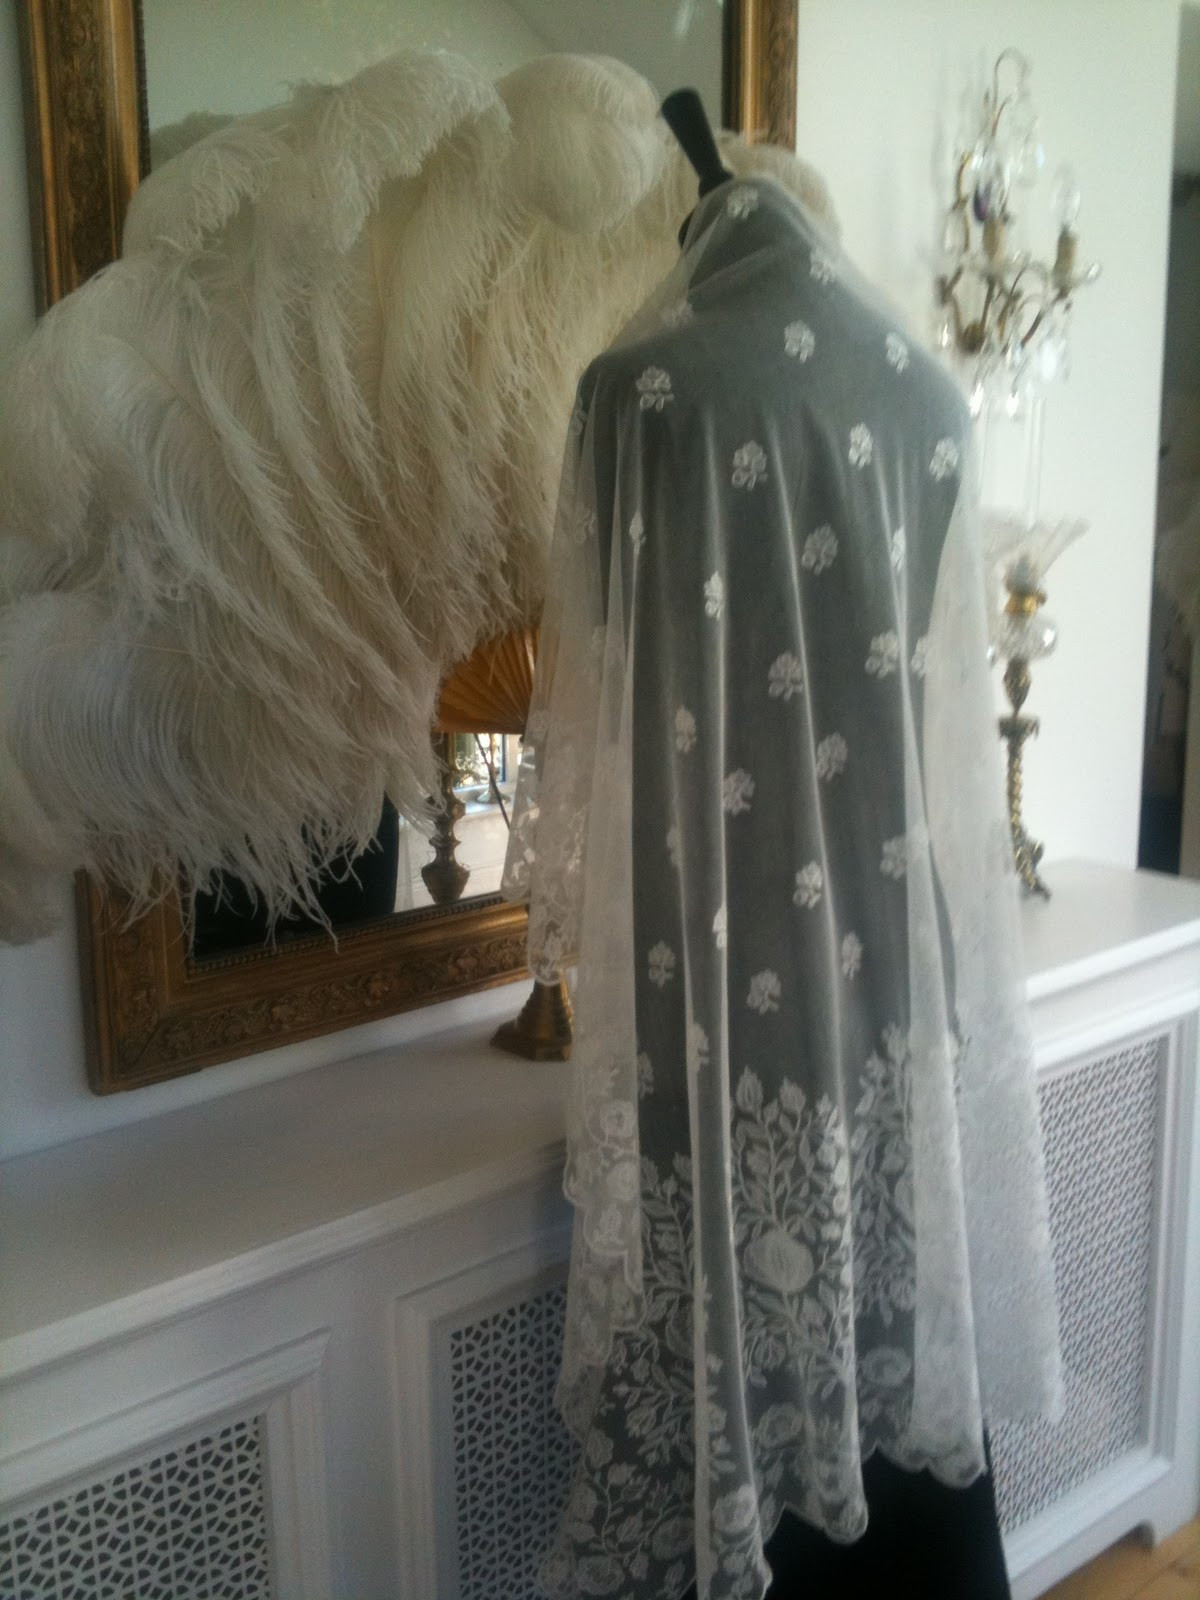 Wedding Veils For Sale
 Rosemary Cathcart Antique Lace and Vintage Fashion